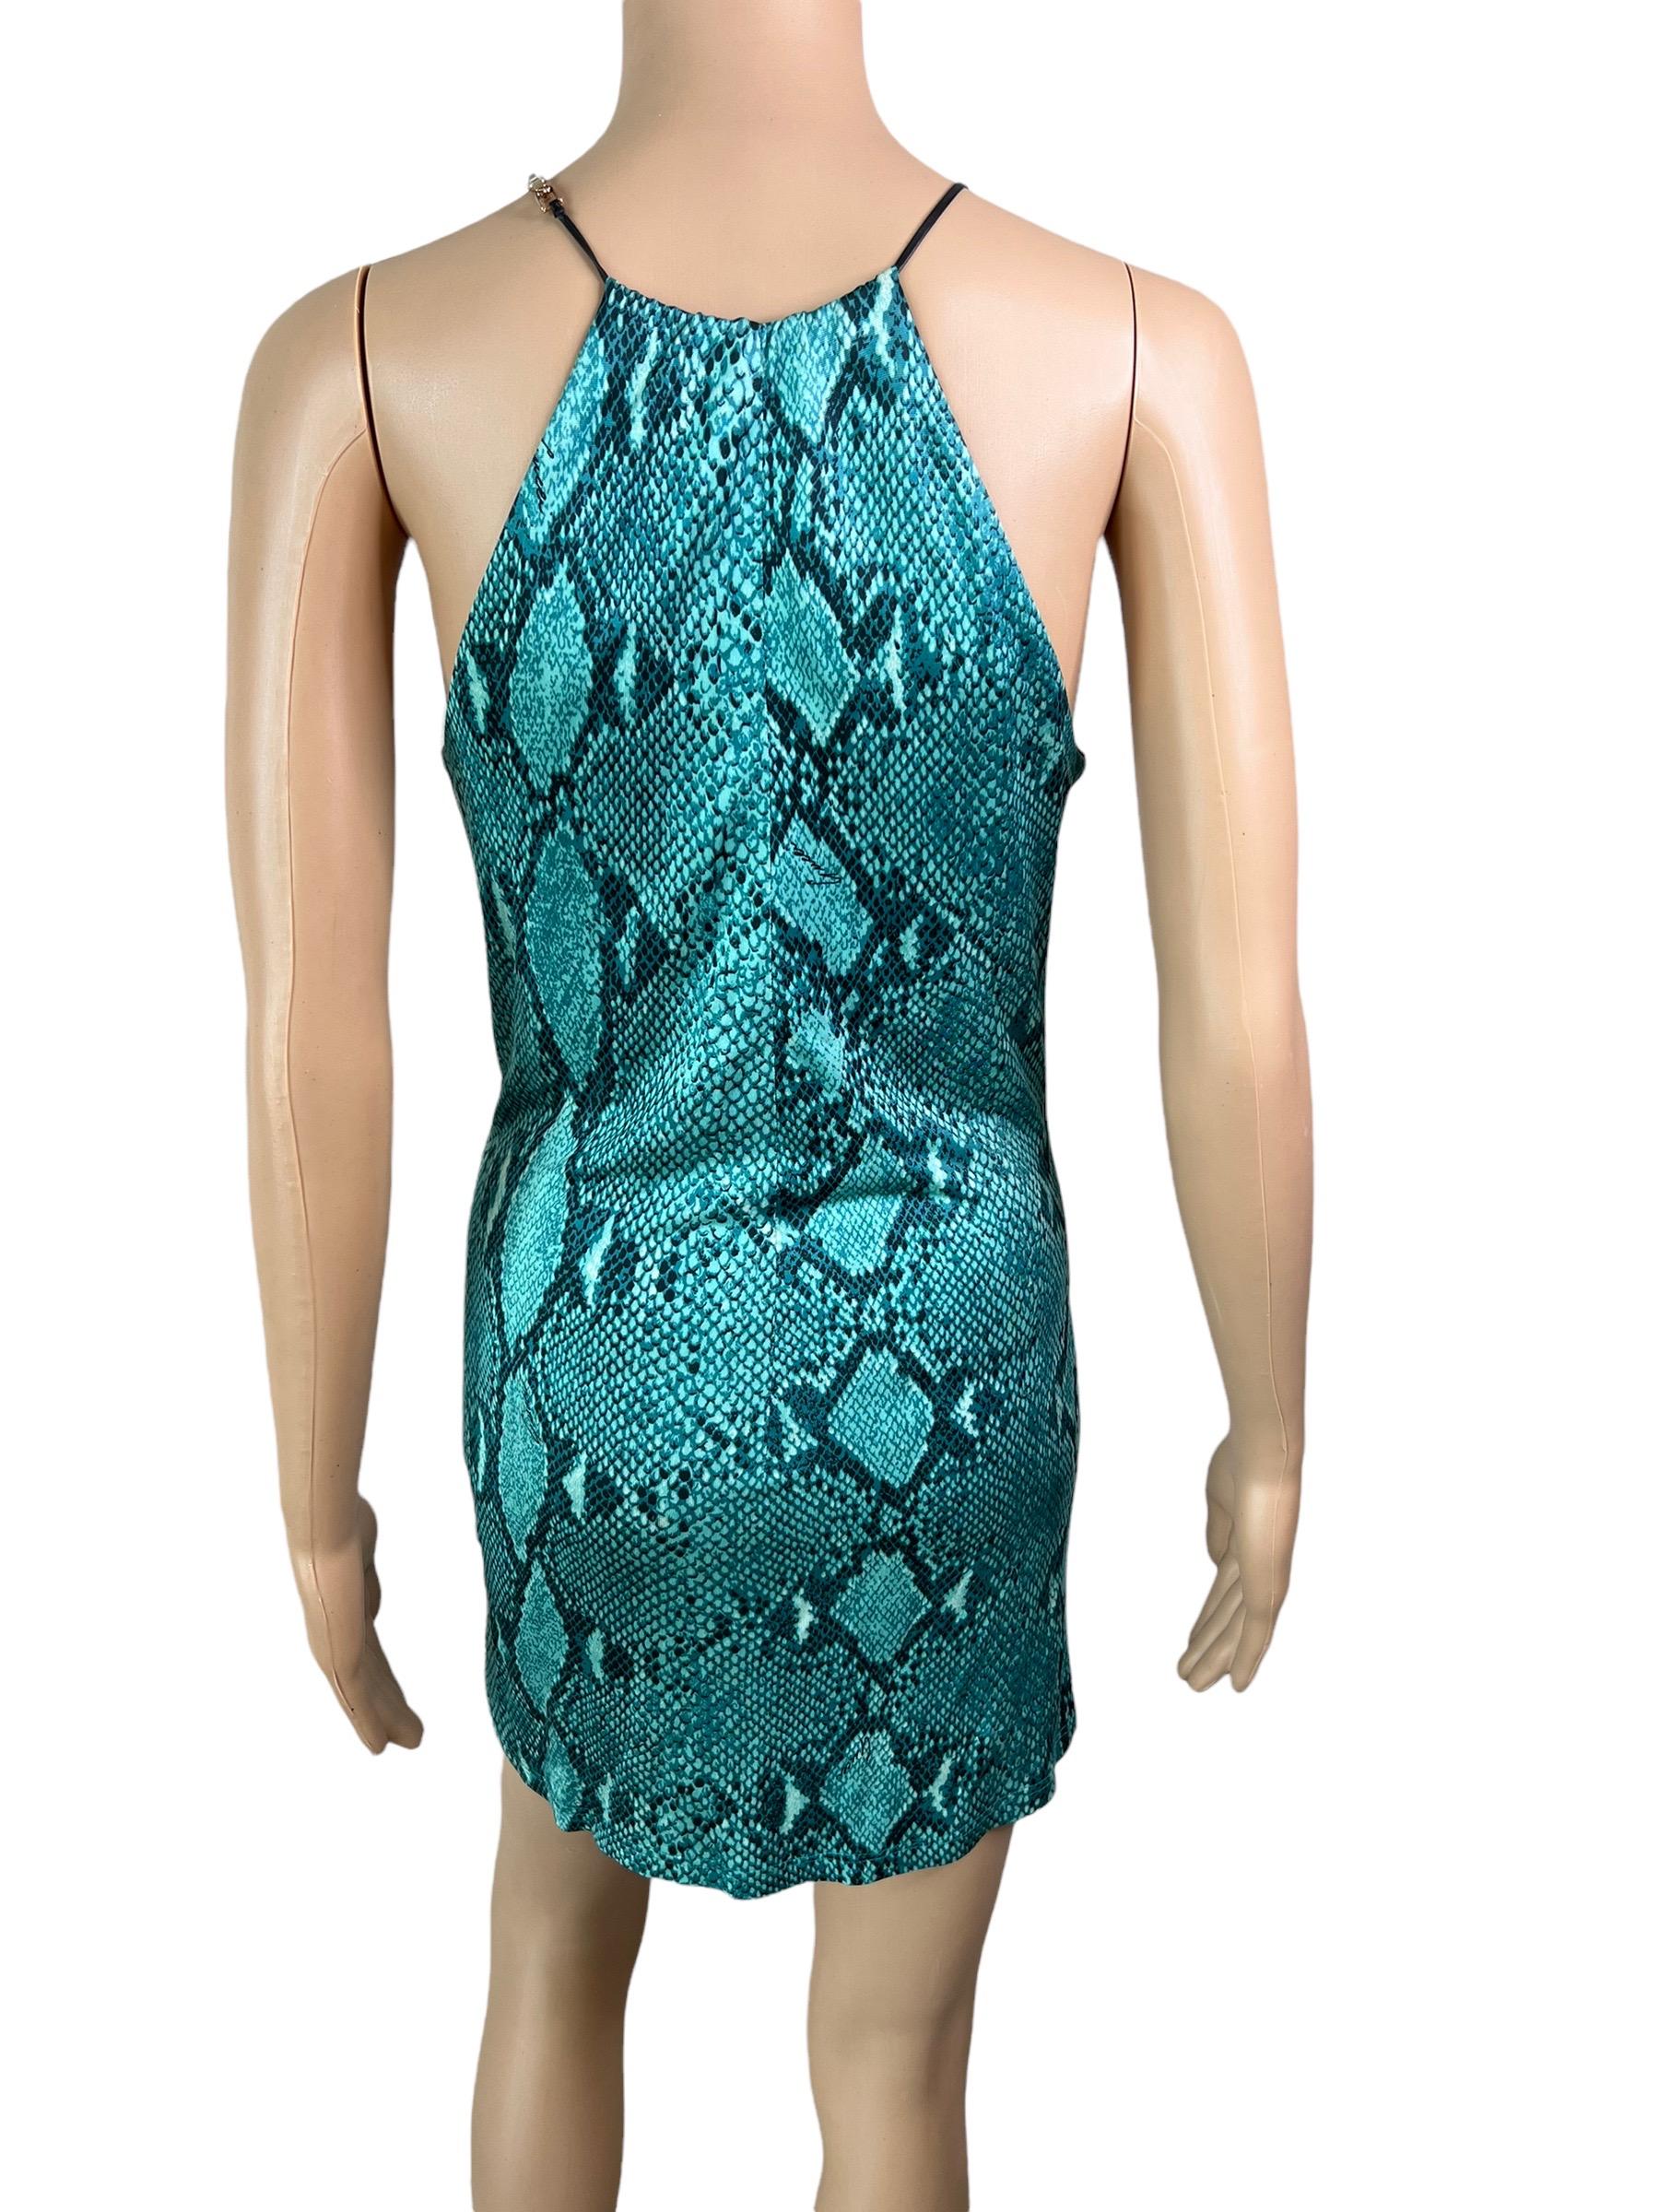 Women's or Men's Tom Ford for Gucci S/S 2000 Runway Plunging Python Print Knit Mini Dress